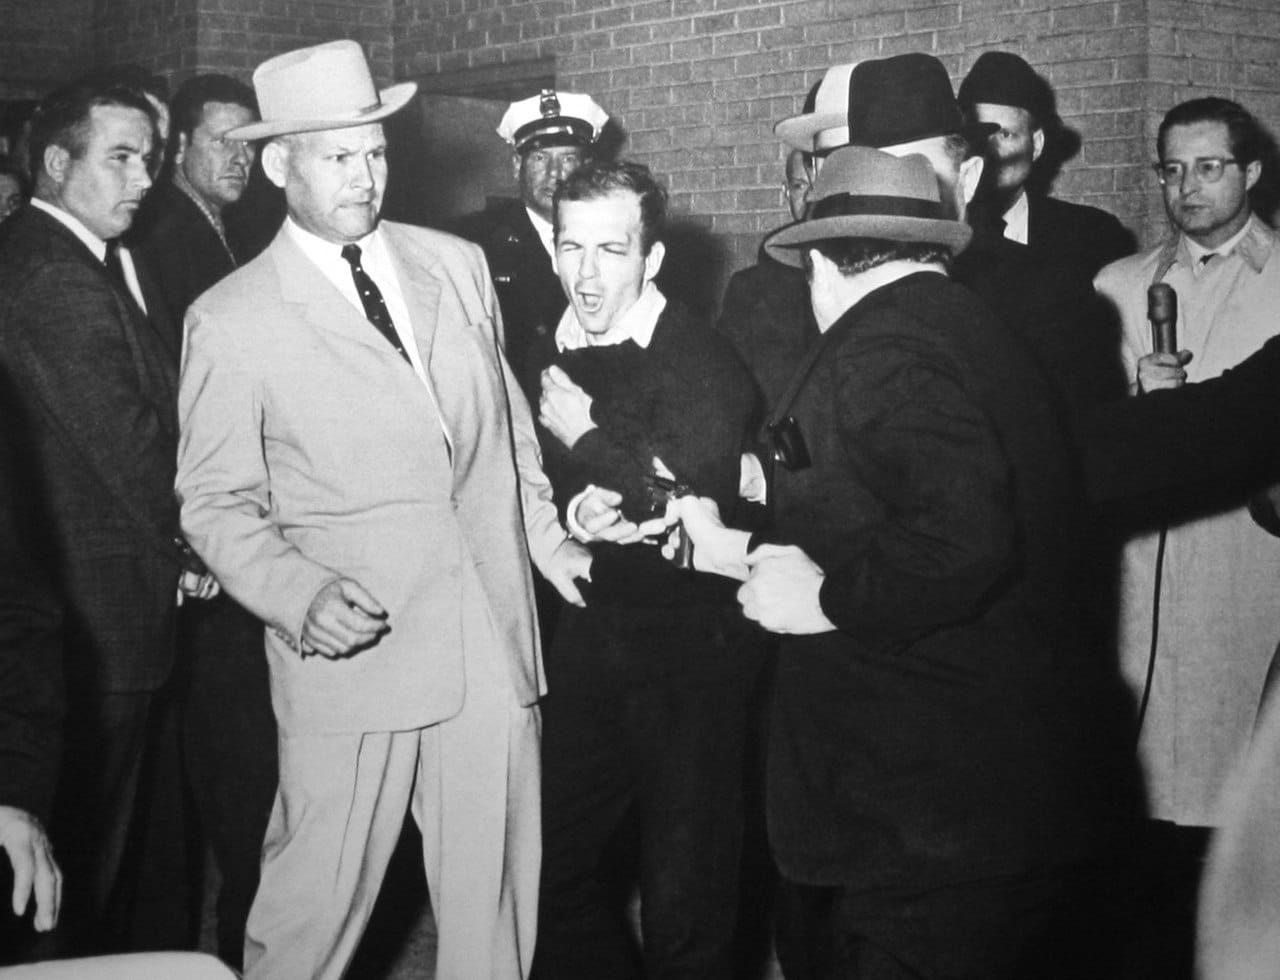 1280px ruby shoots oswald | jfk assassinated 59 years ago – here are the shocking news videos and pics from that day